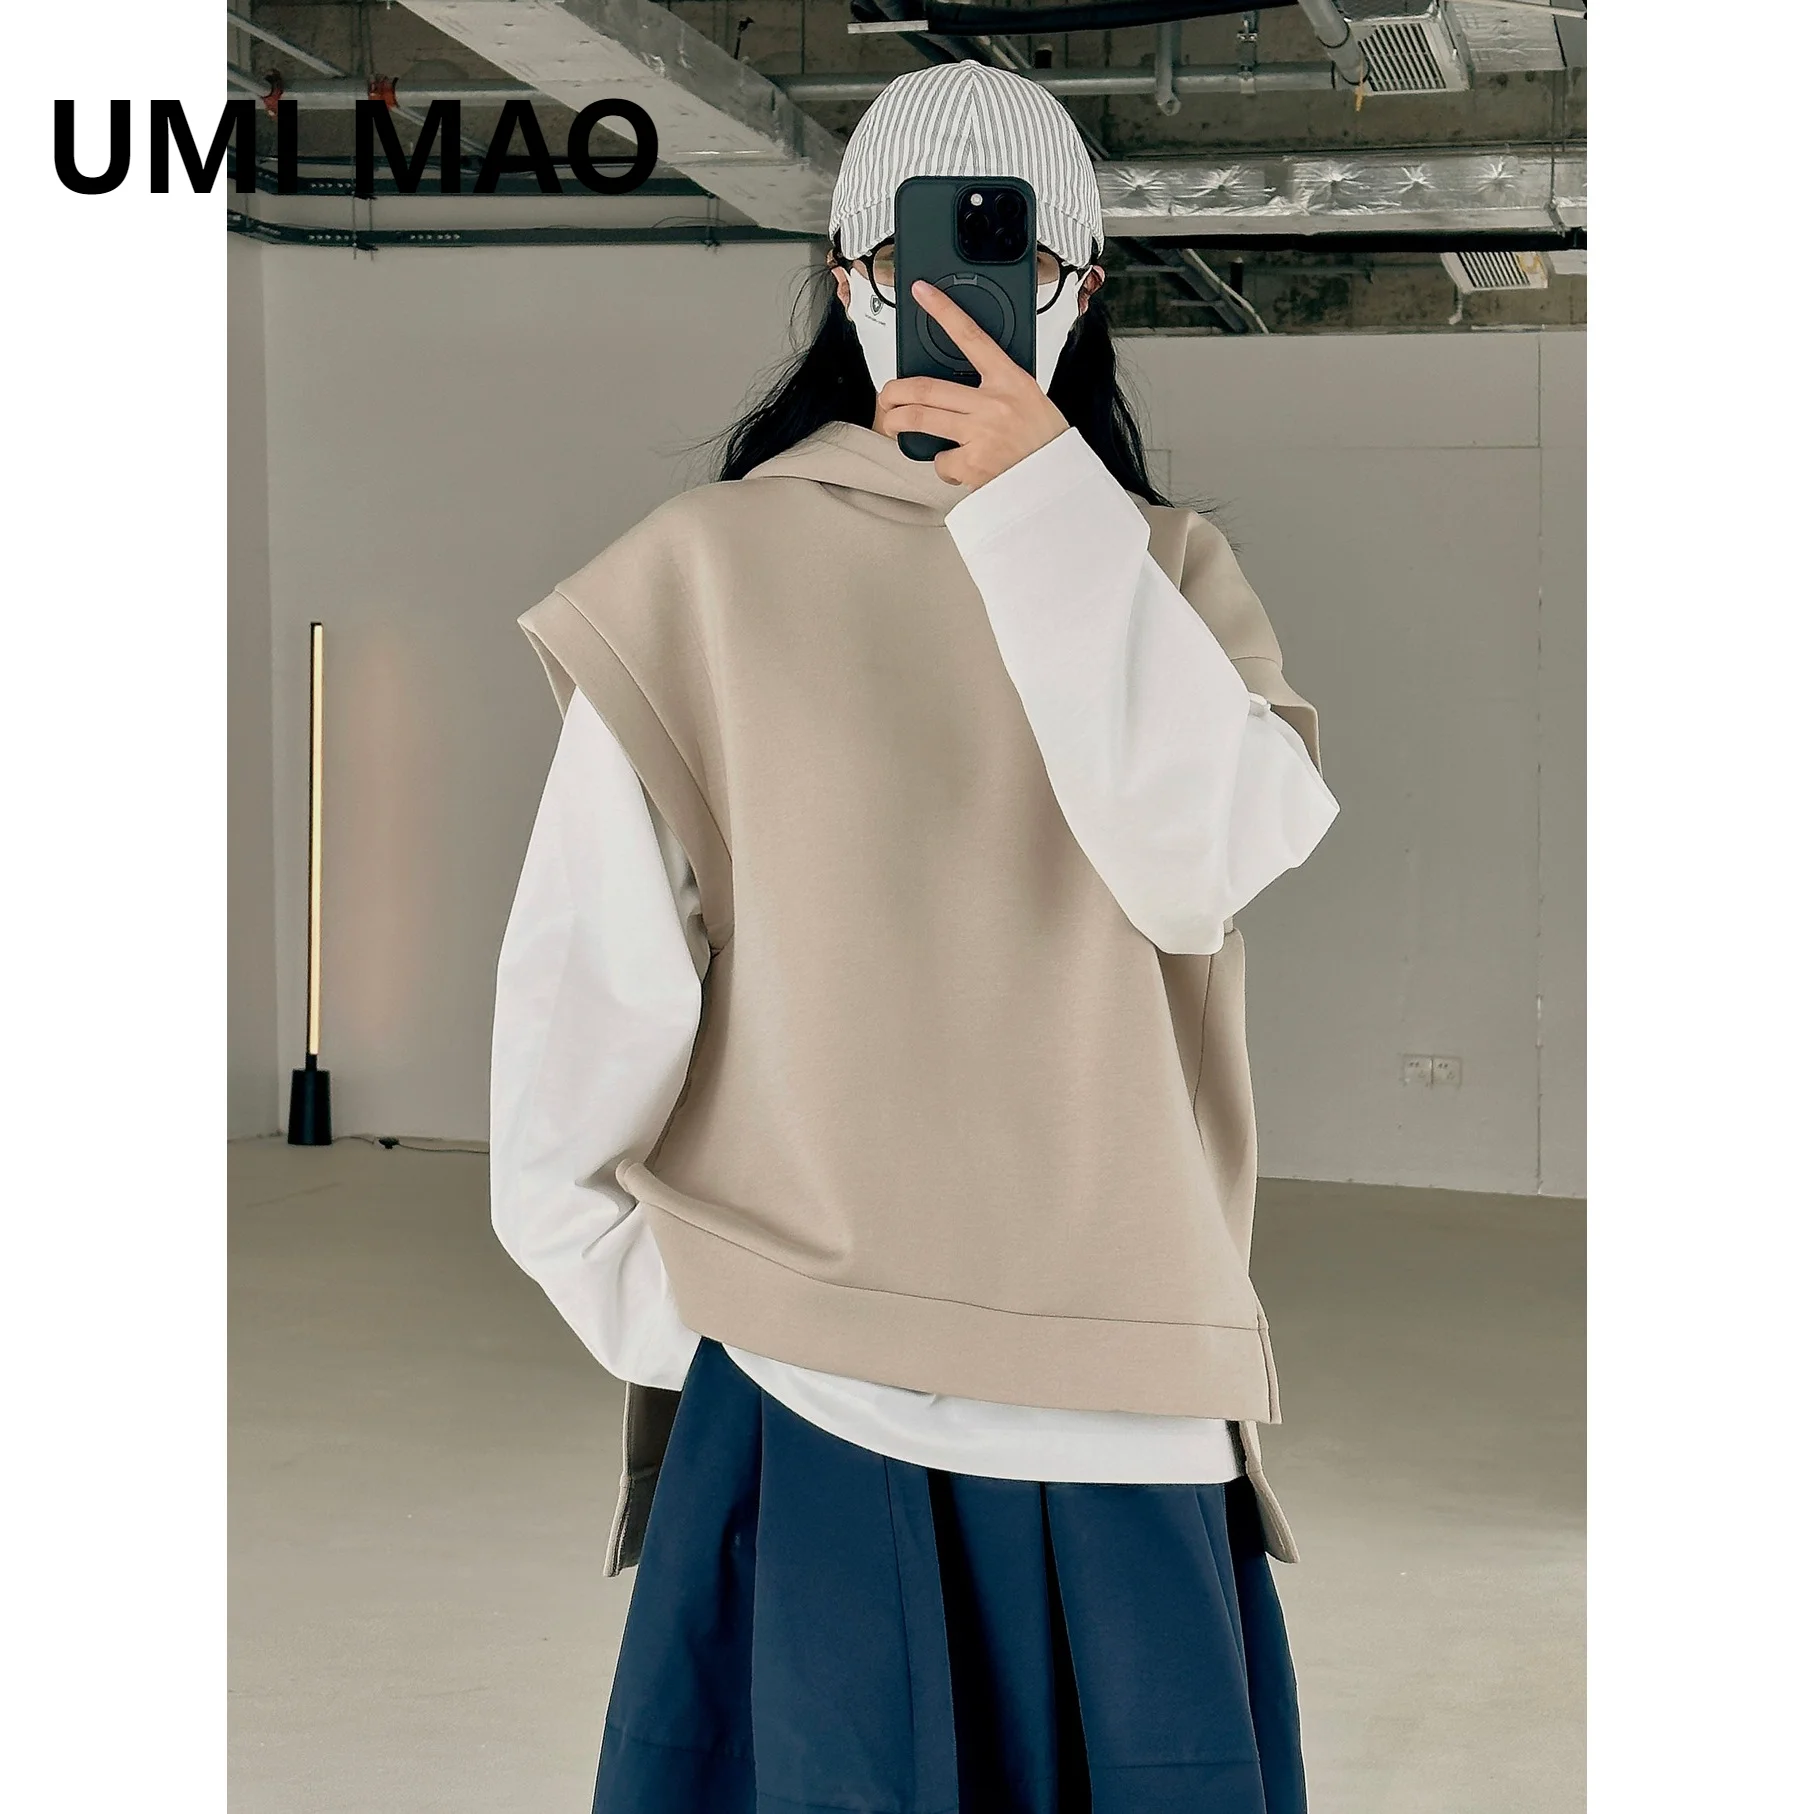 

UMI MAO New Japanese Street Leisure Air Layer Hooded Vest Loose Silhouette Layered Sleeveless Sweater Top Winter Coat Women